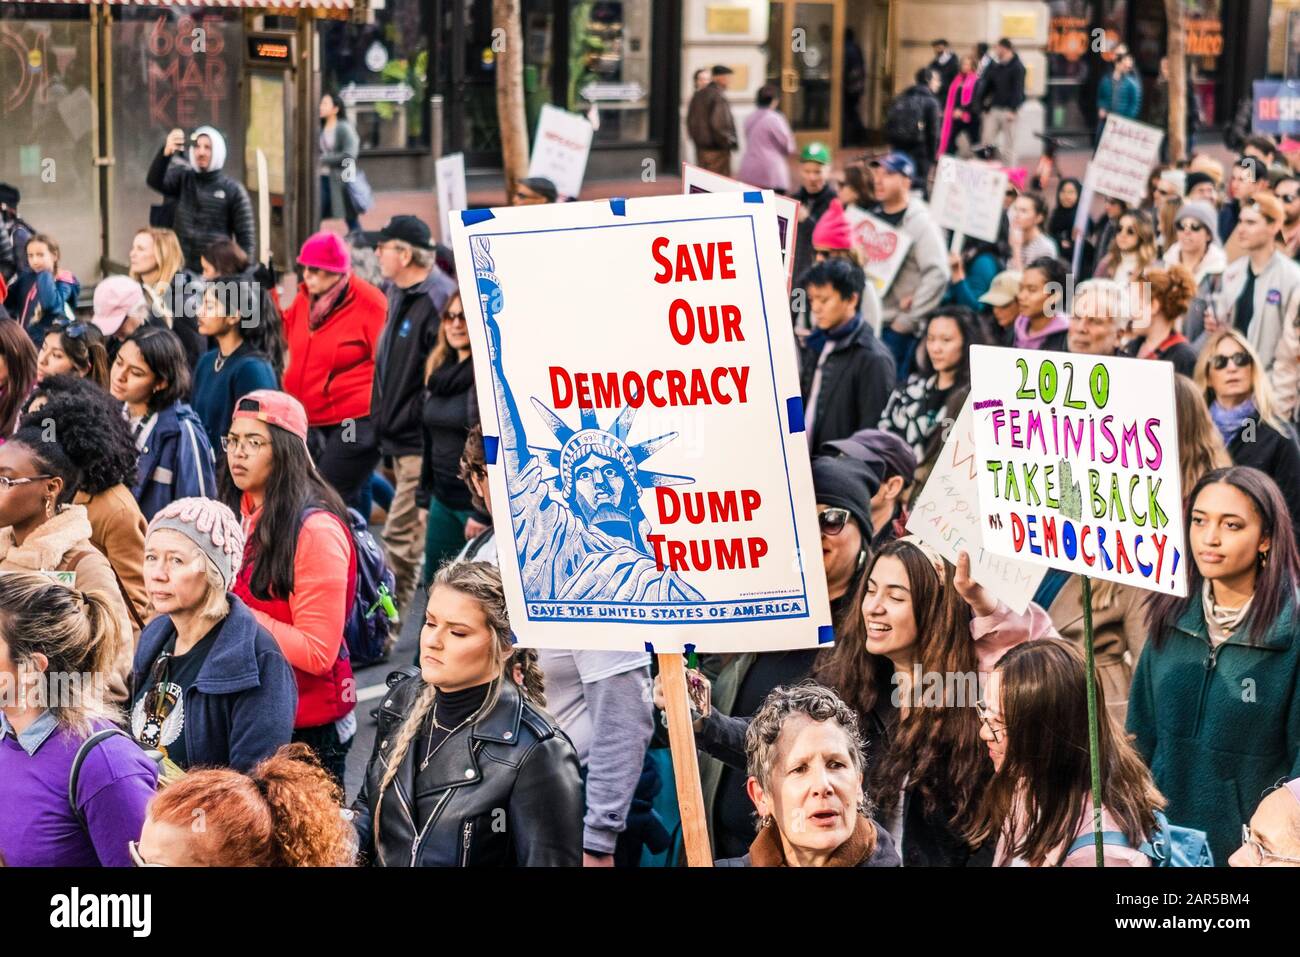 Jan 18, 2020 San Francisco / CA / USA - Participant to the Women's March event holds a sign asking for Trump's removal while marching on Market street Stock Photo